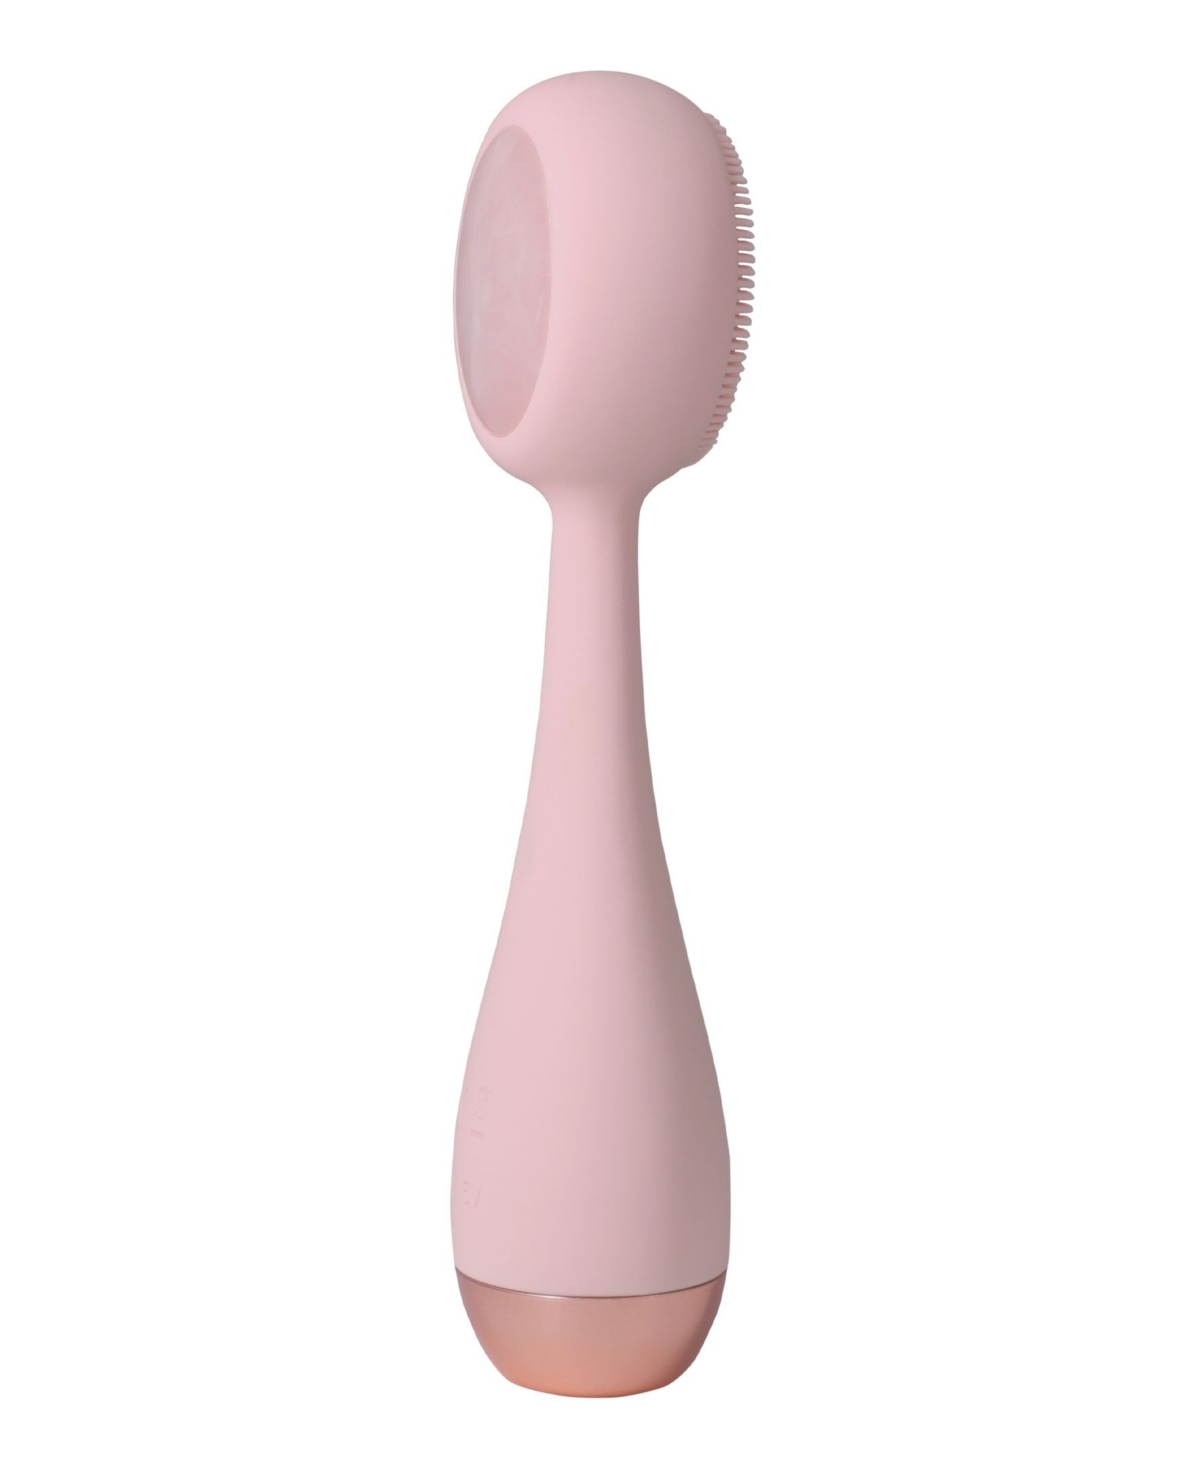 Clean Pro Rose Quartz- Facial Cleansing Device - Blush with Rose Gold Finish